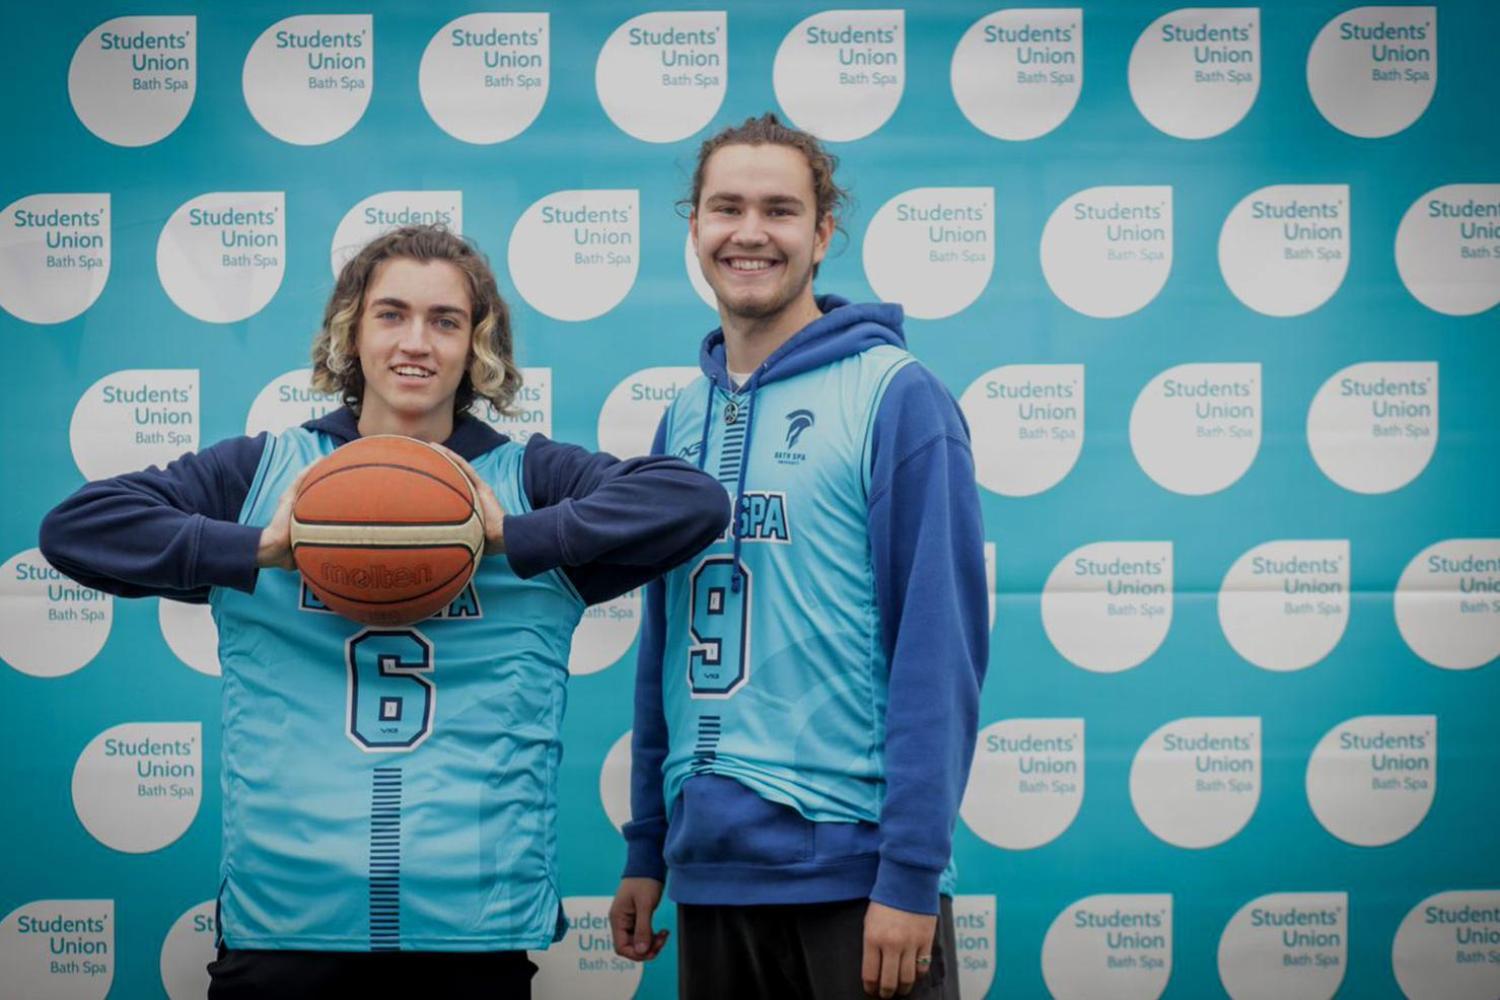 Two students stand in front of the SU backdrop, holding a sports ball